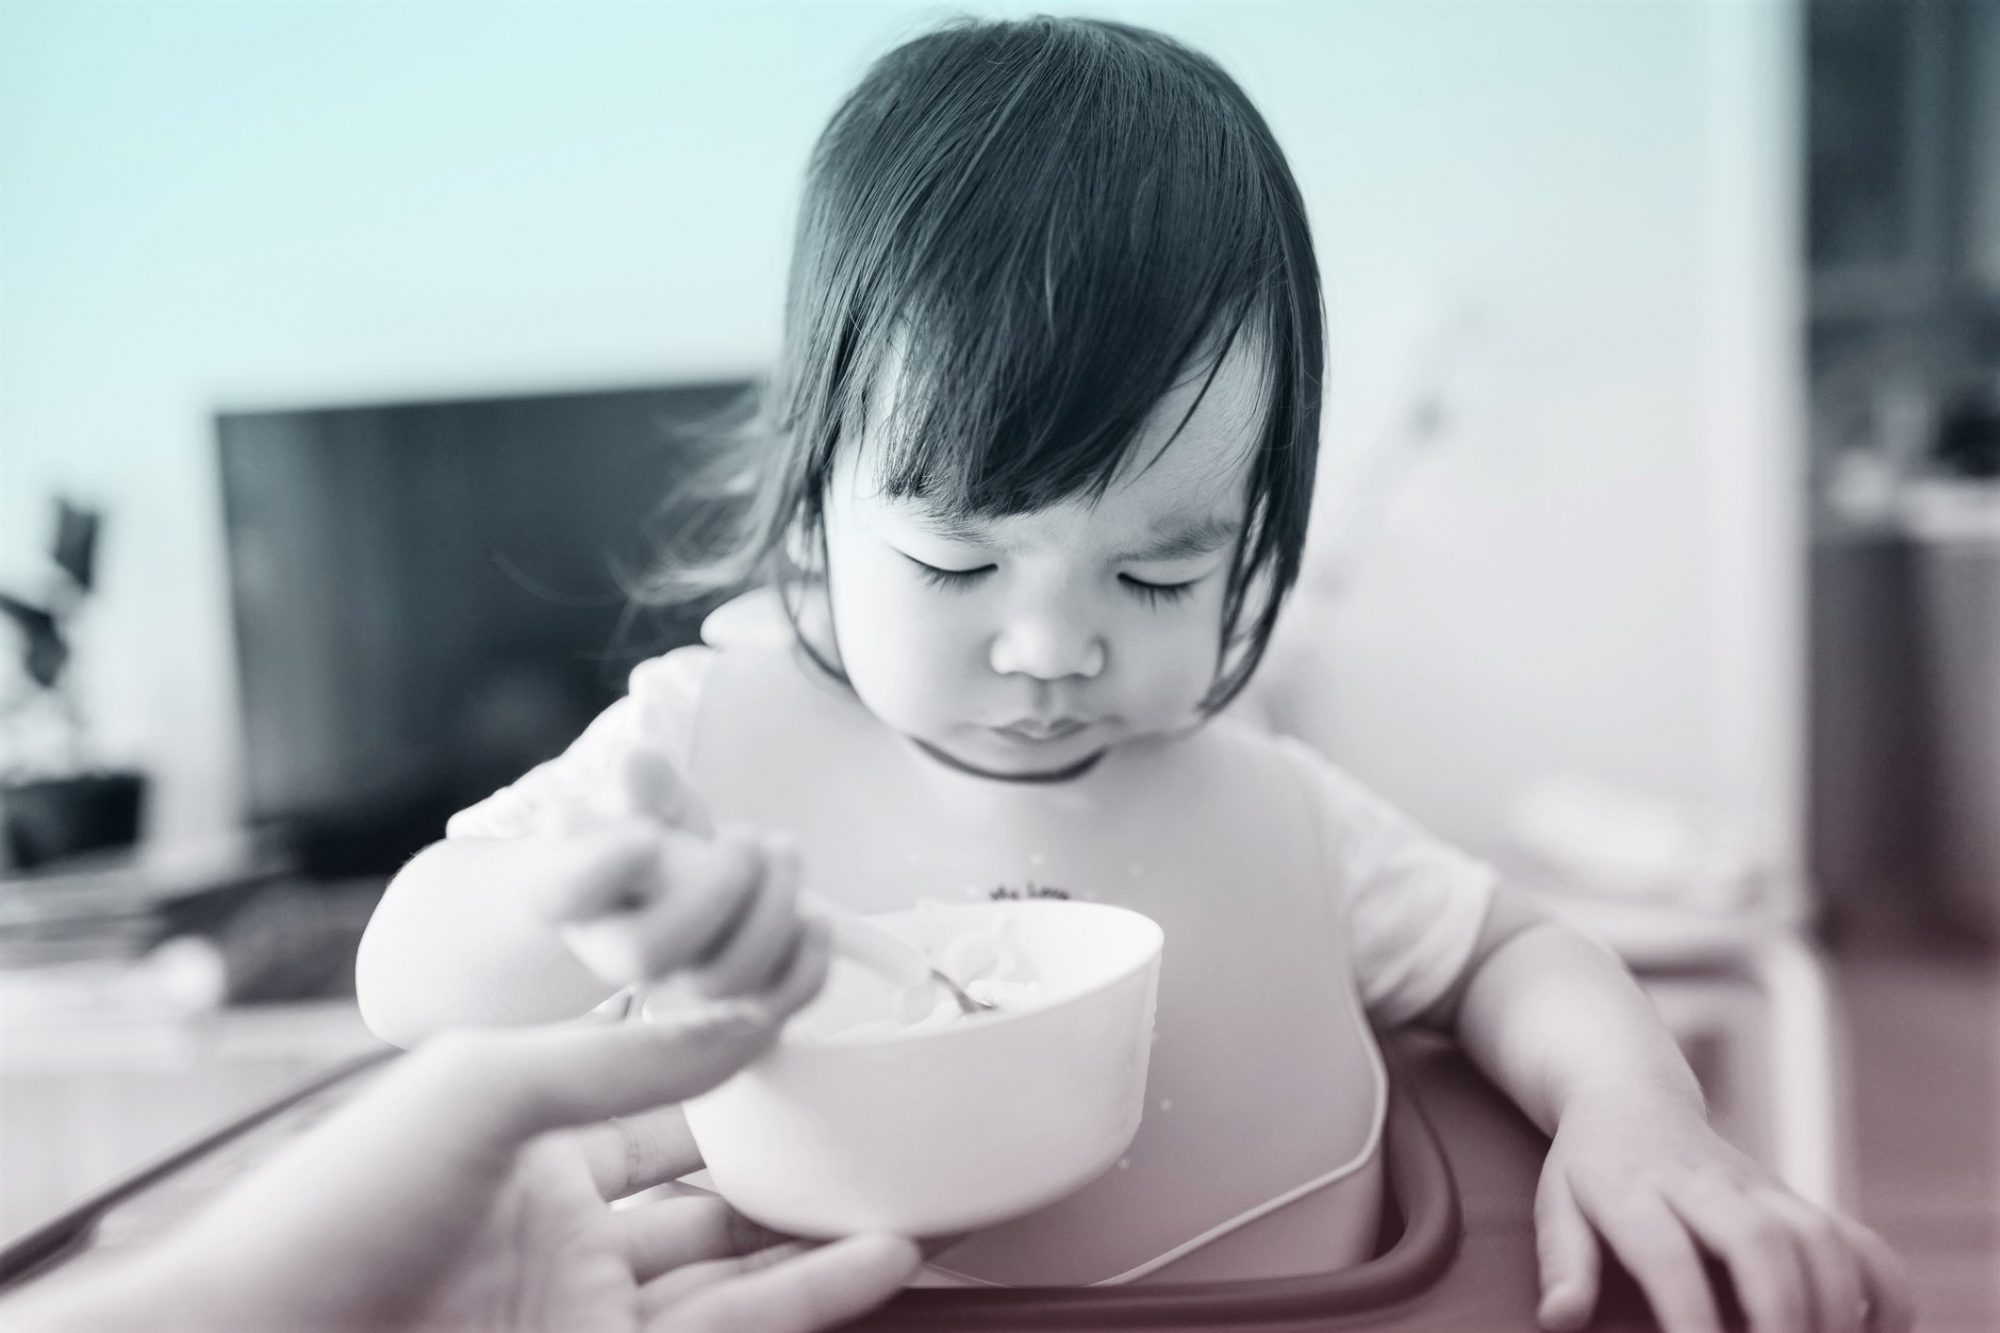 Asian toddler girl sitting on high chair feeding herself at home